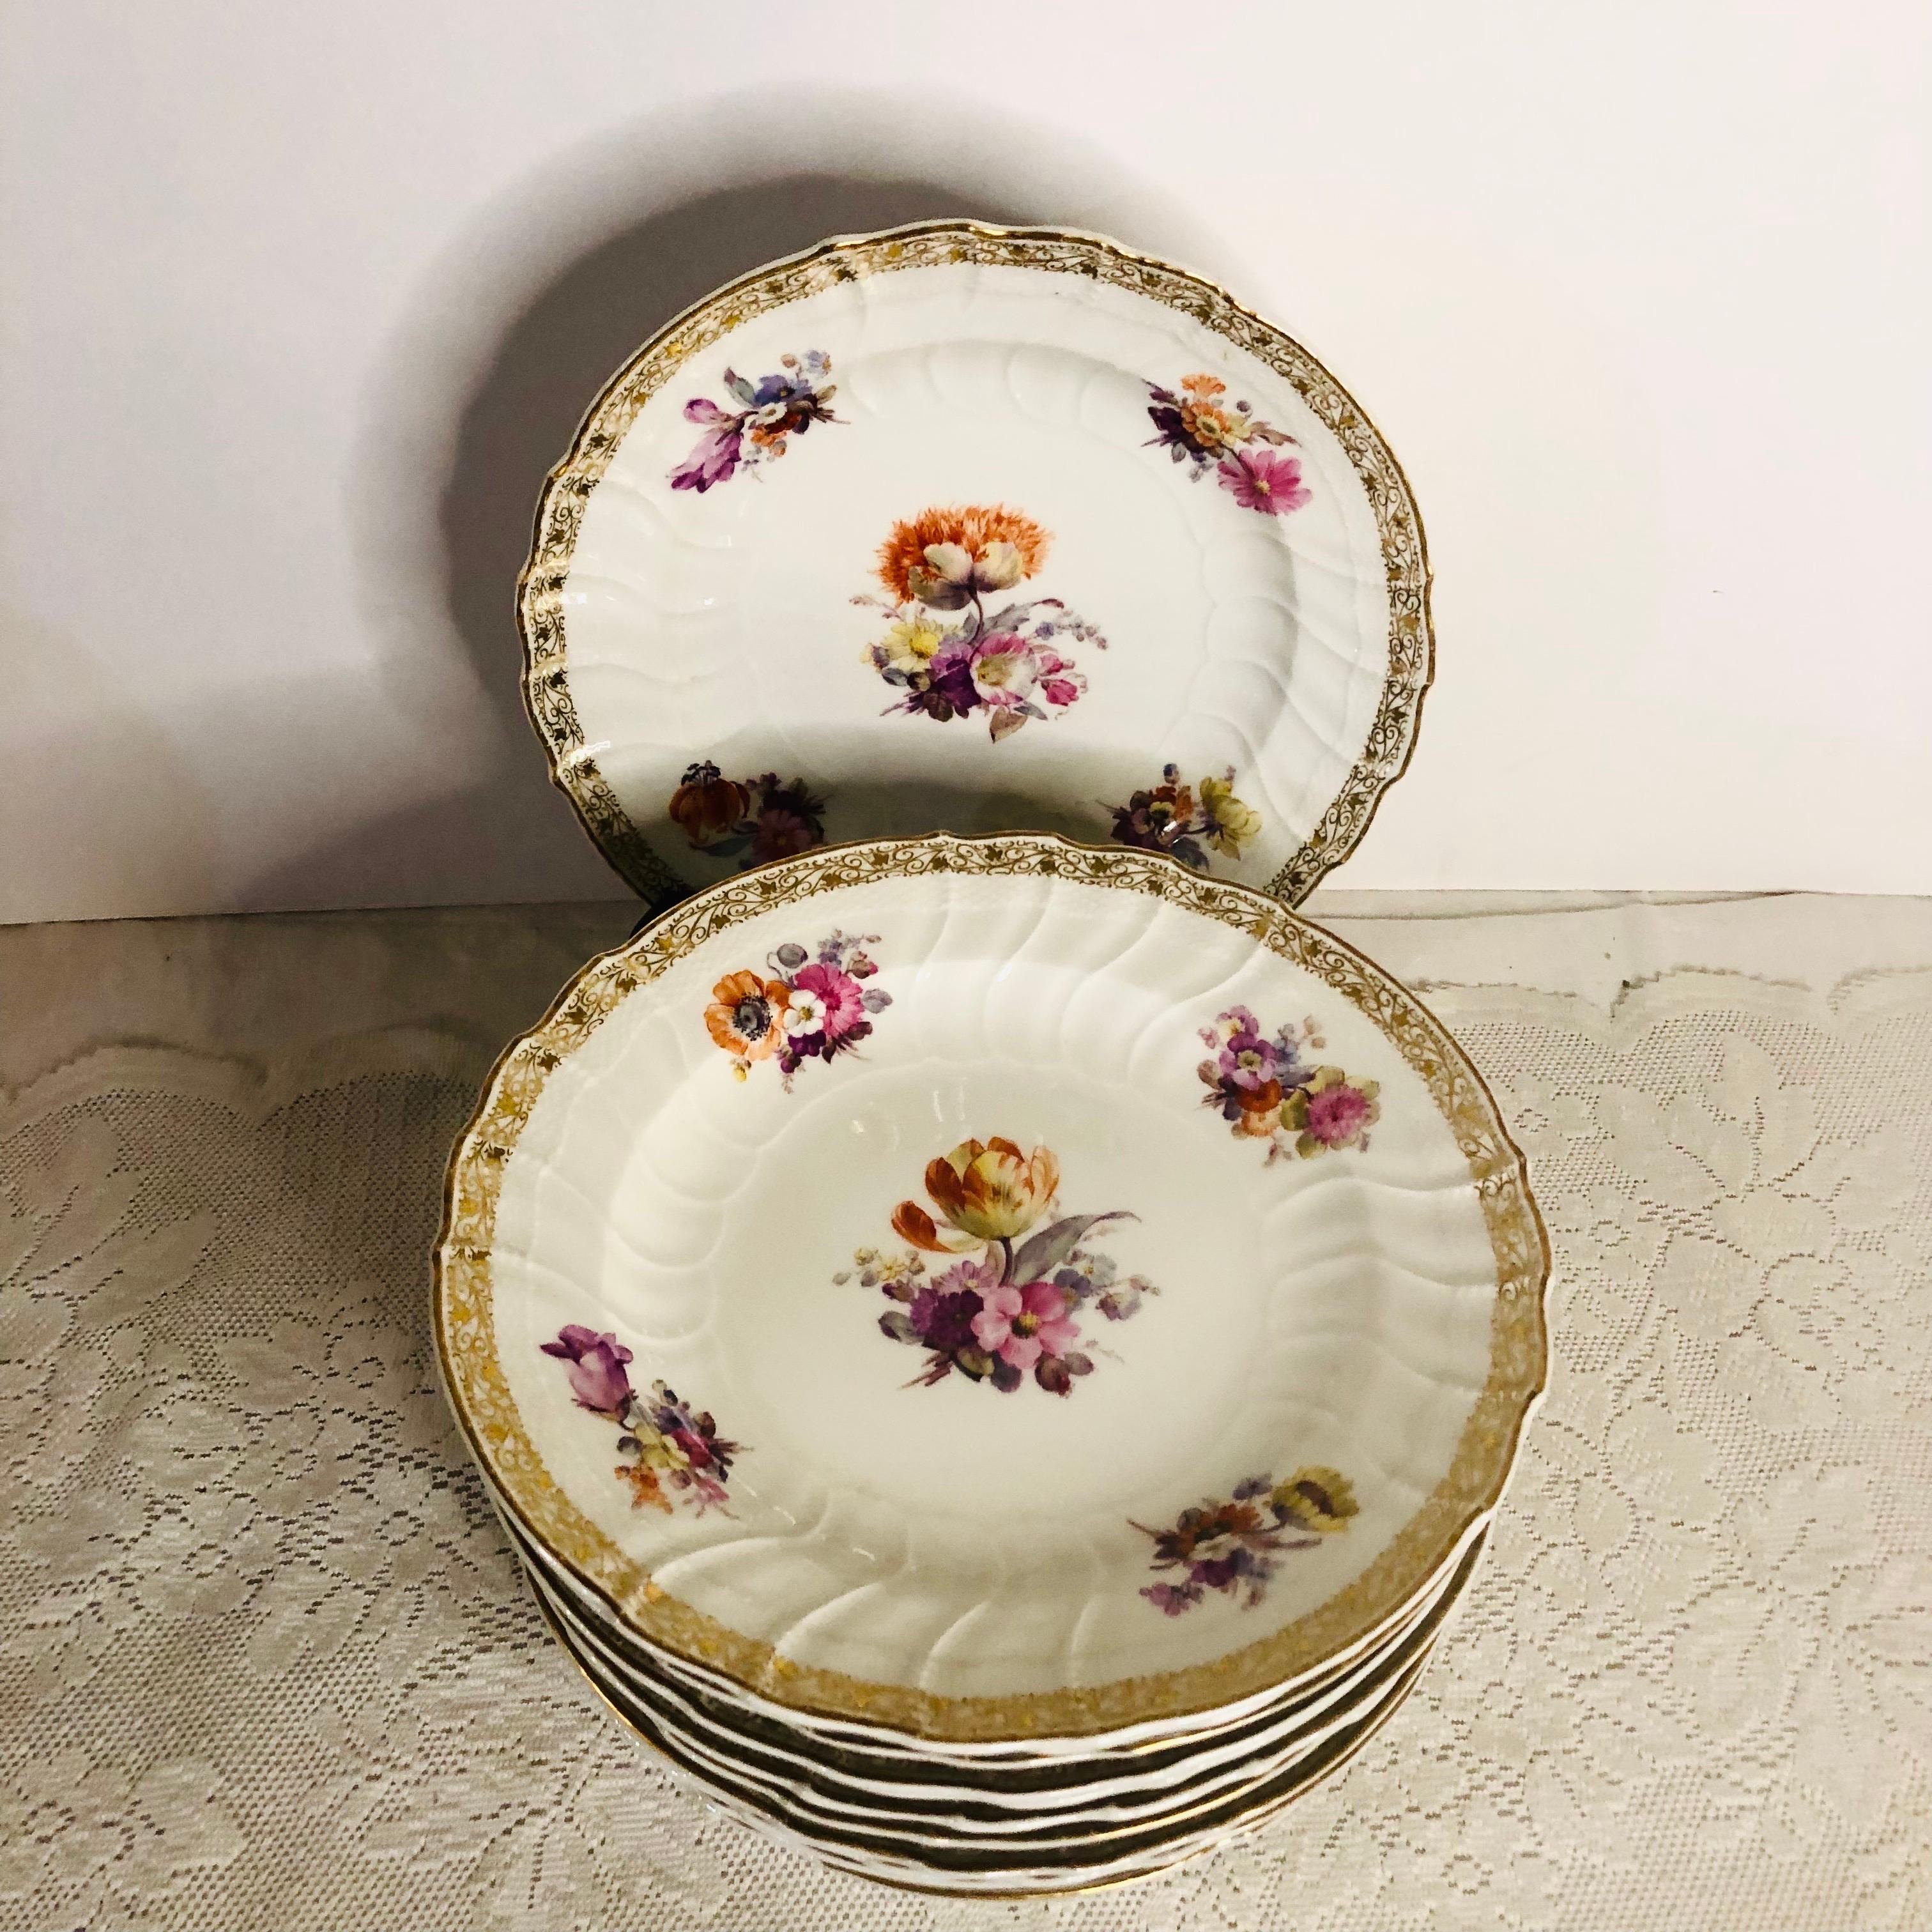 Set of twelve KPM dinner plates with different museum quality hand-painted floral bouquets on each plate. KPM is also known as the Konigliche Porzellan-Manufaktur of Germany. They had very talented artists who did an outstanding job of painting on